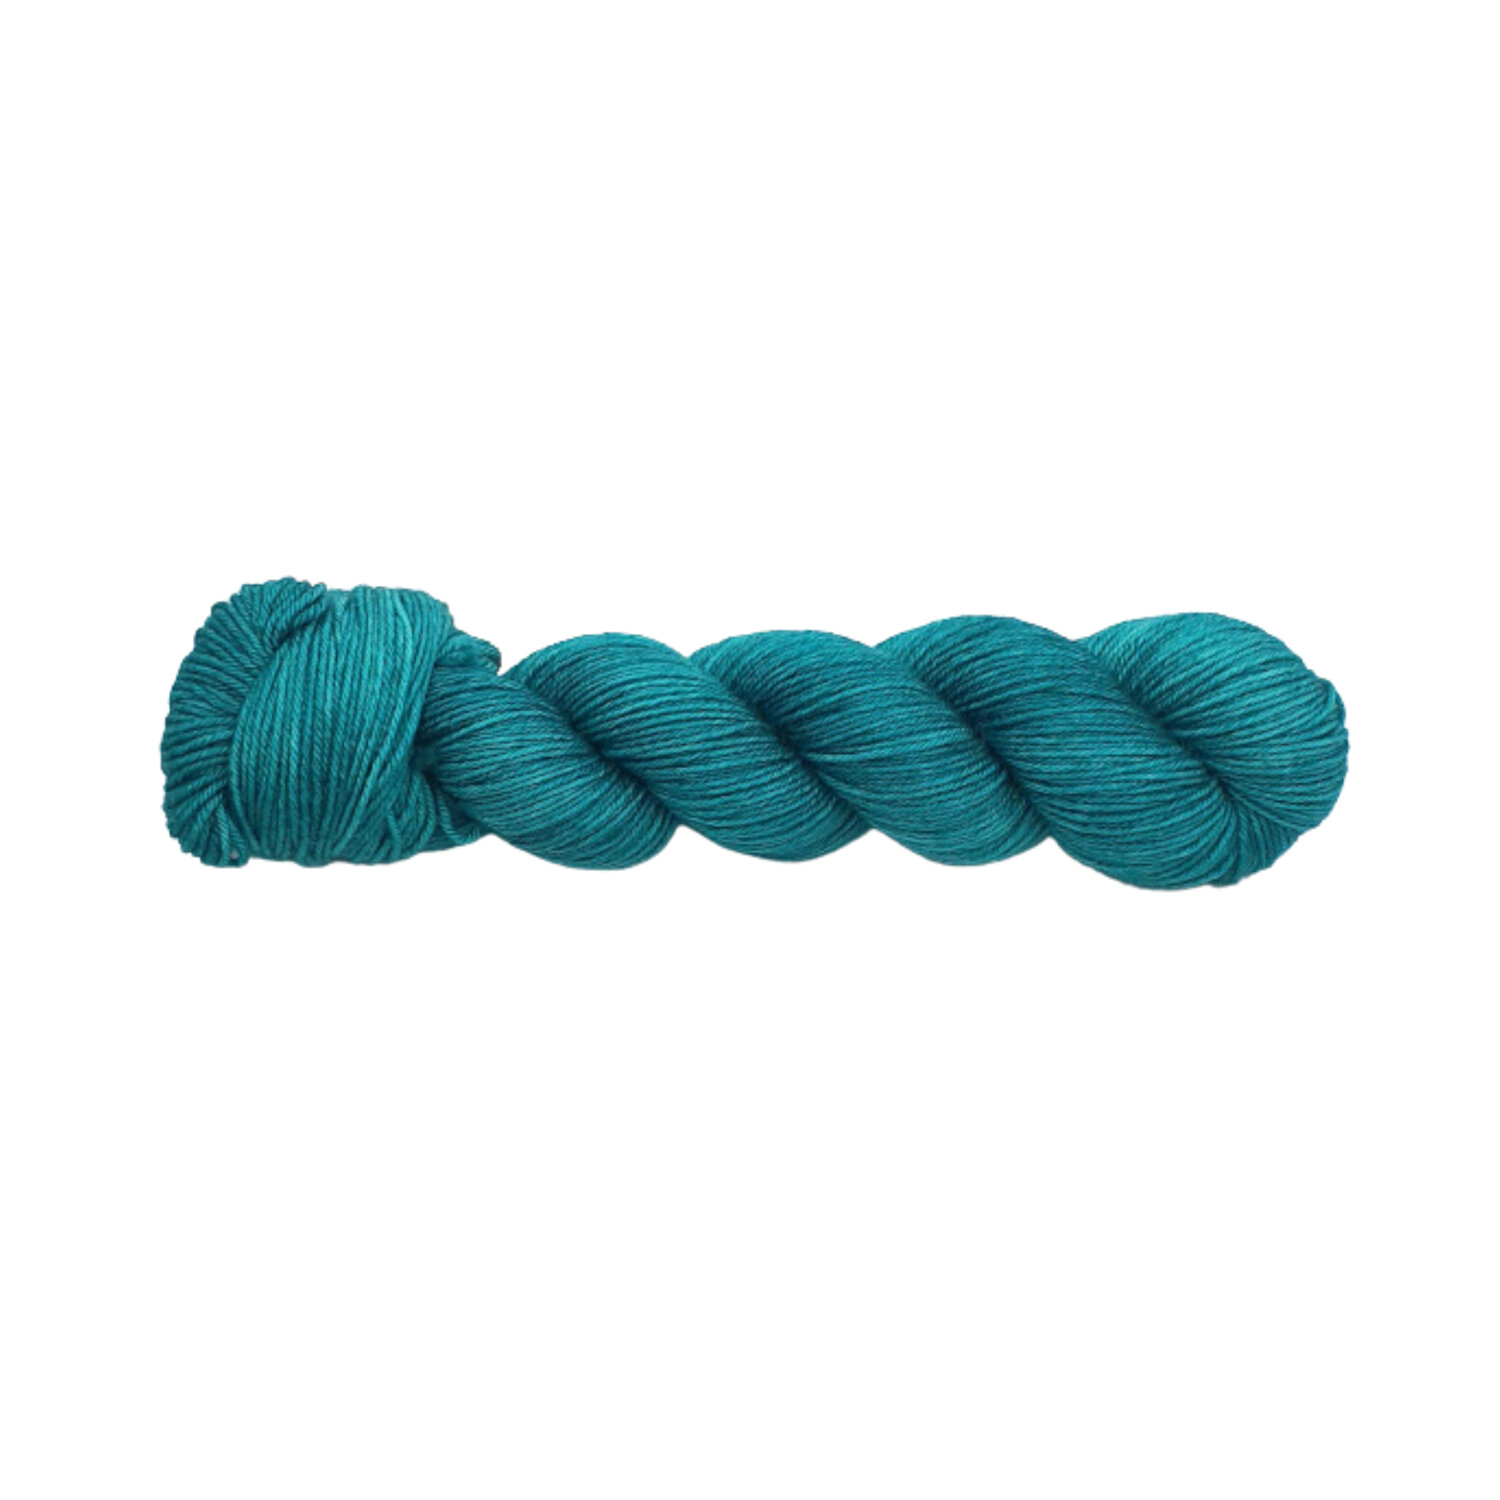 Teal for Two - DK BFL